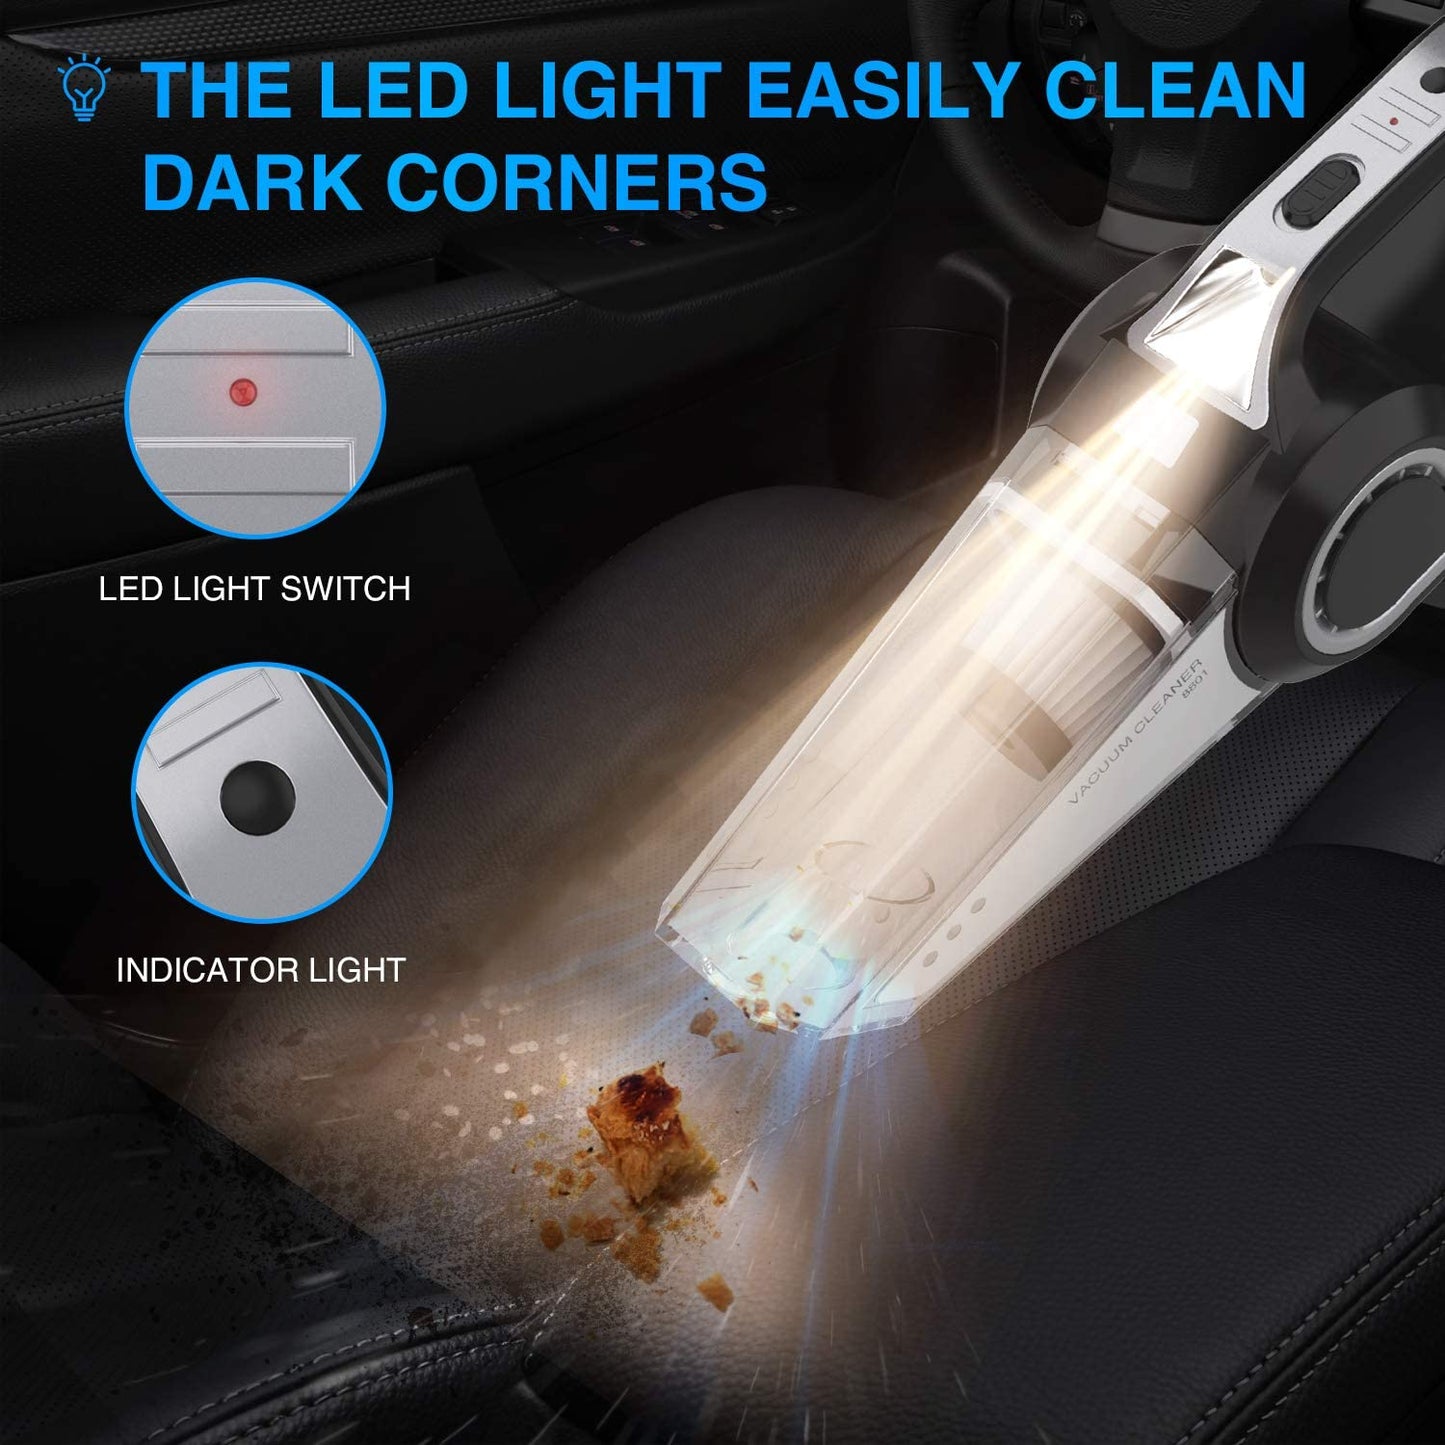 Handheld Vacuums, Mutifunction Car Vacuums Cleaner with Searchlight, Tire Pressure Gauge and Car Inflator, 120W DC 12V Up to 6500Pa Powerful Suction for Wet and Dry